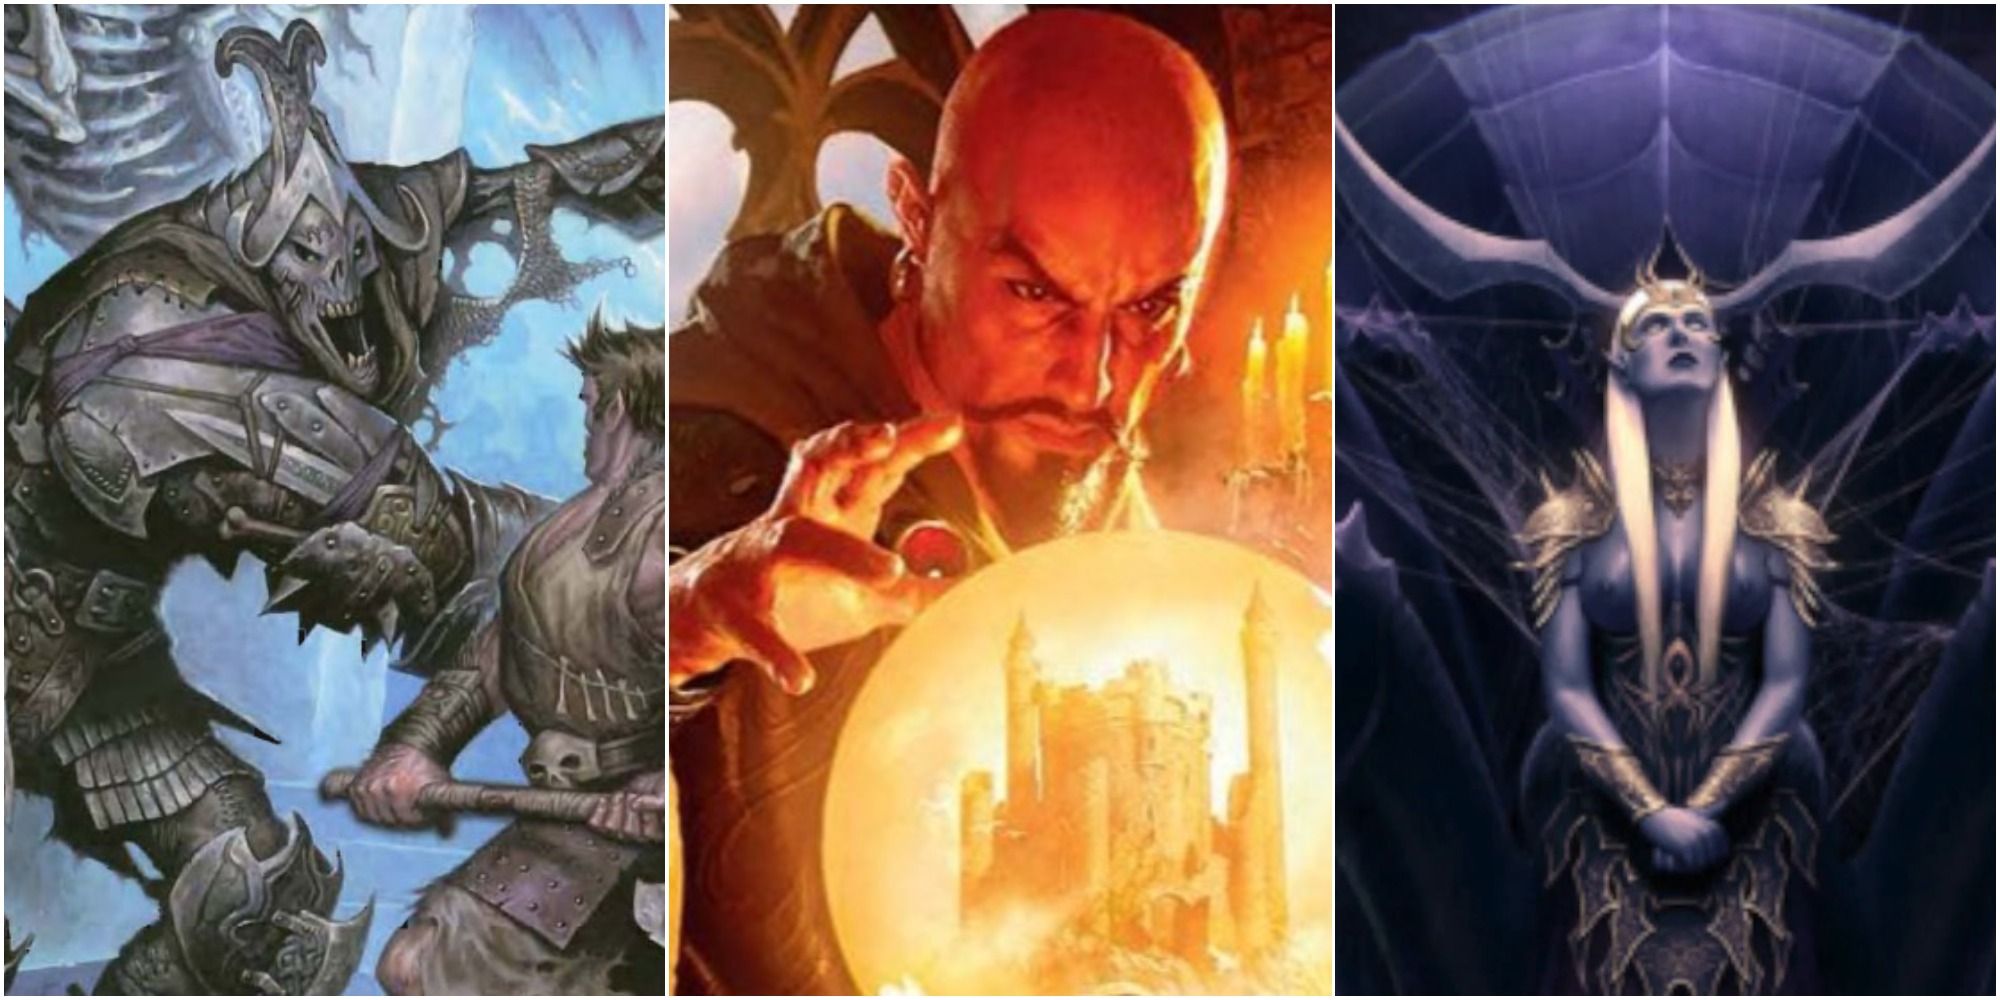 Dungeons and Dragons 3 5 edition adventures feature with lolth, greyhawk, and barrow of the forgotten king